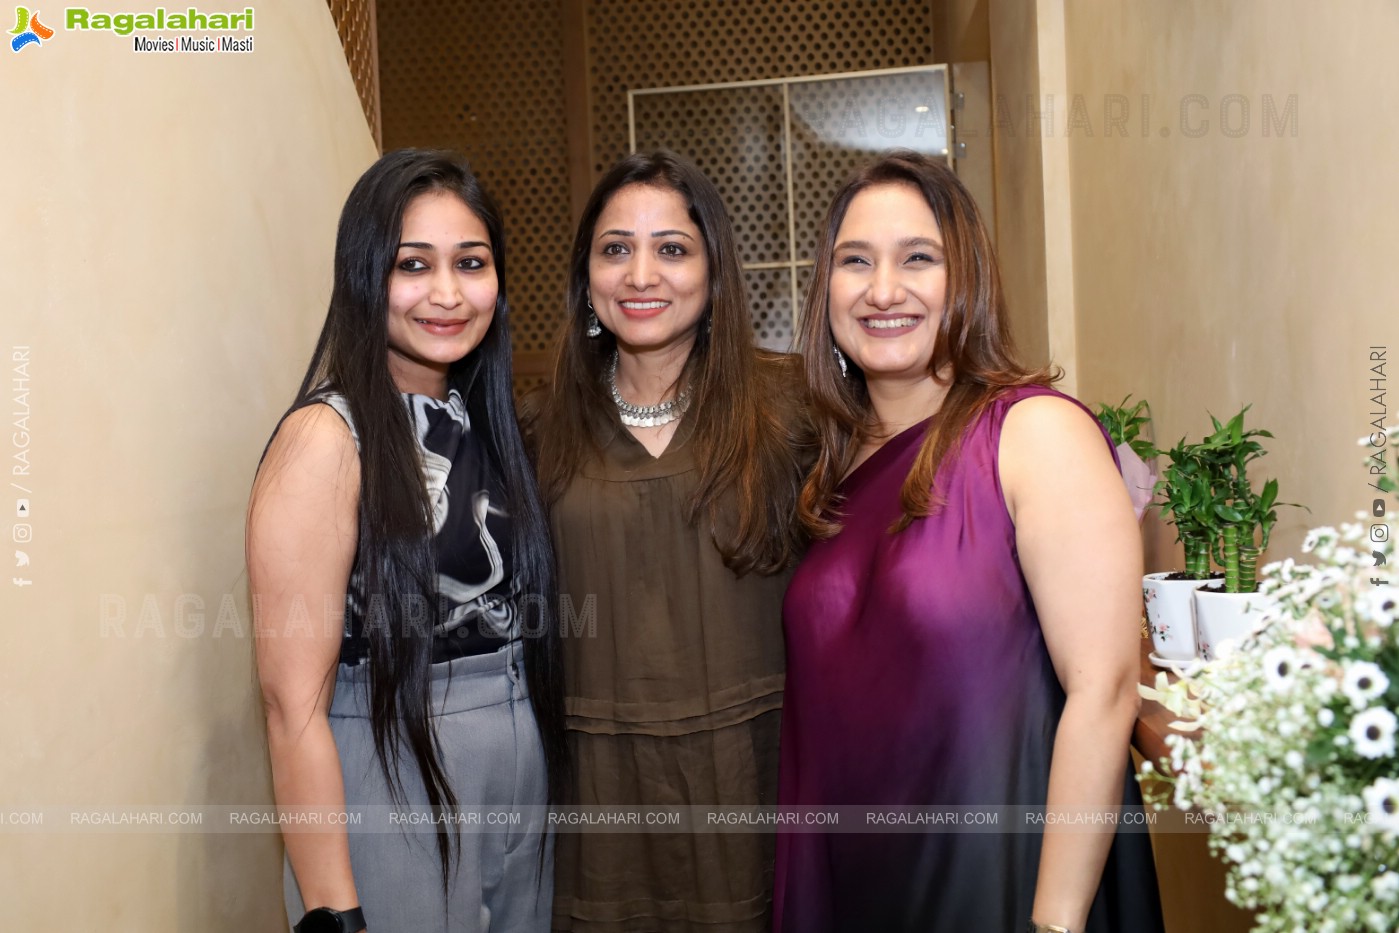 Grand Launch of Tamanna Skin and Hair Care, Hyderabad